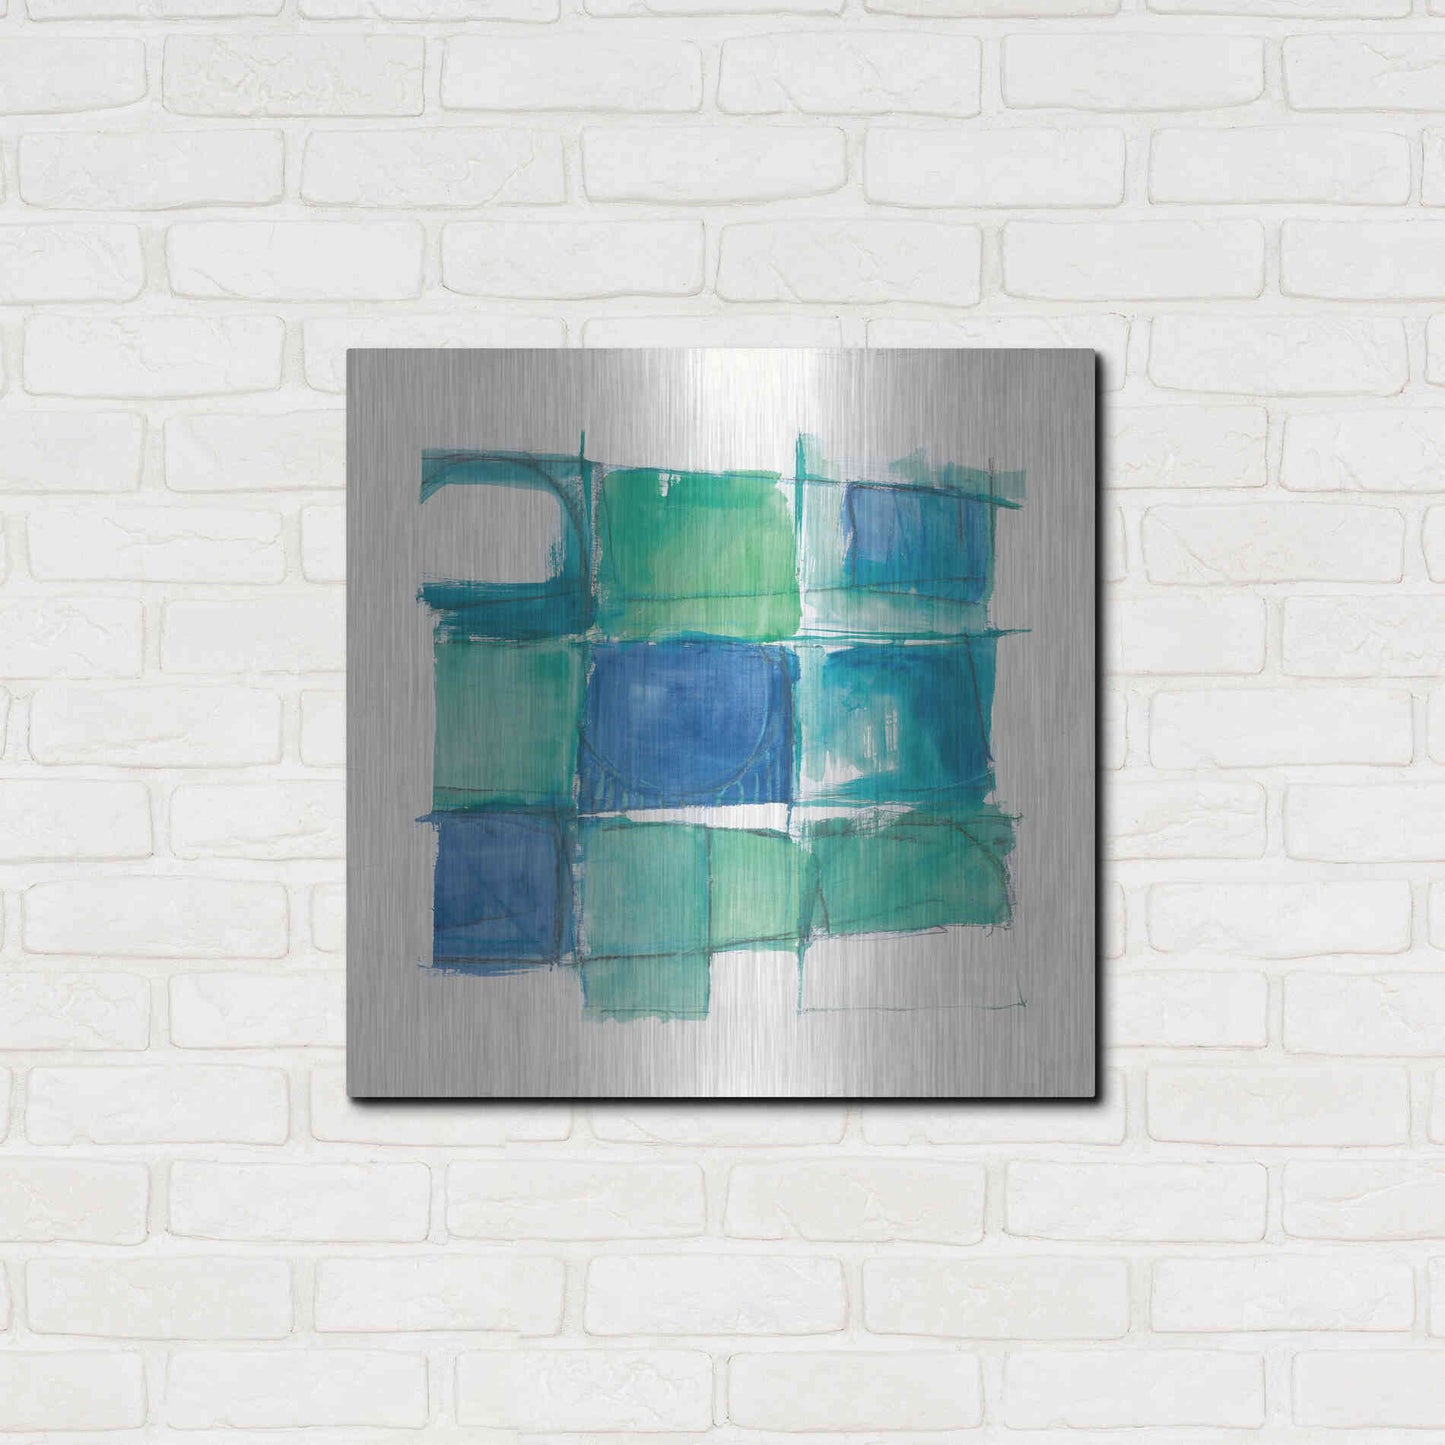 Luxe Metal Art '131 West 3rd Street Square II On White' by Mike Schick, Metal Wall Art,24x24